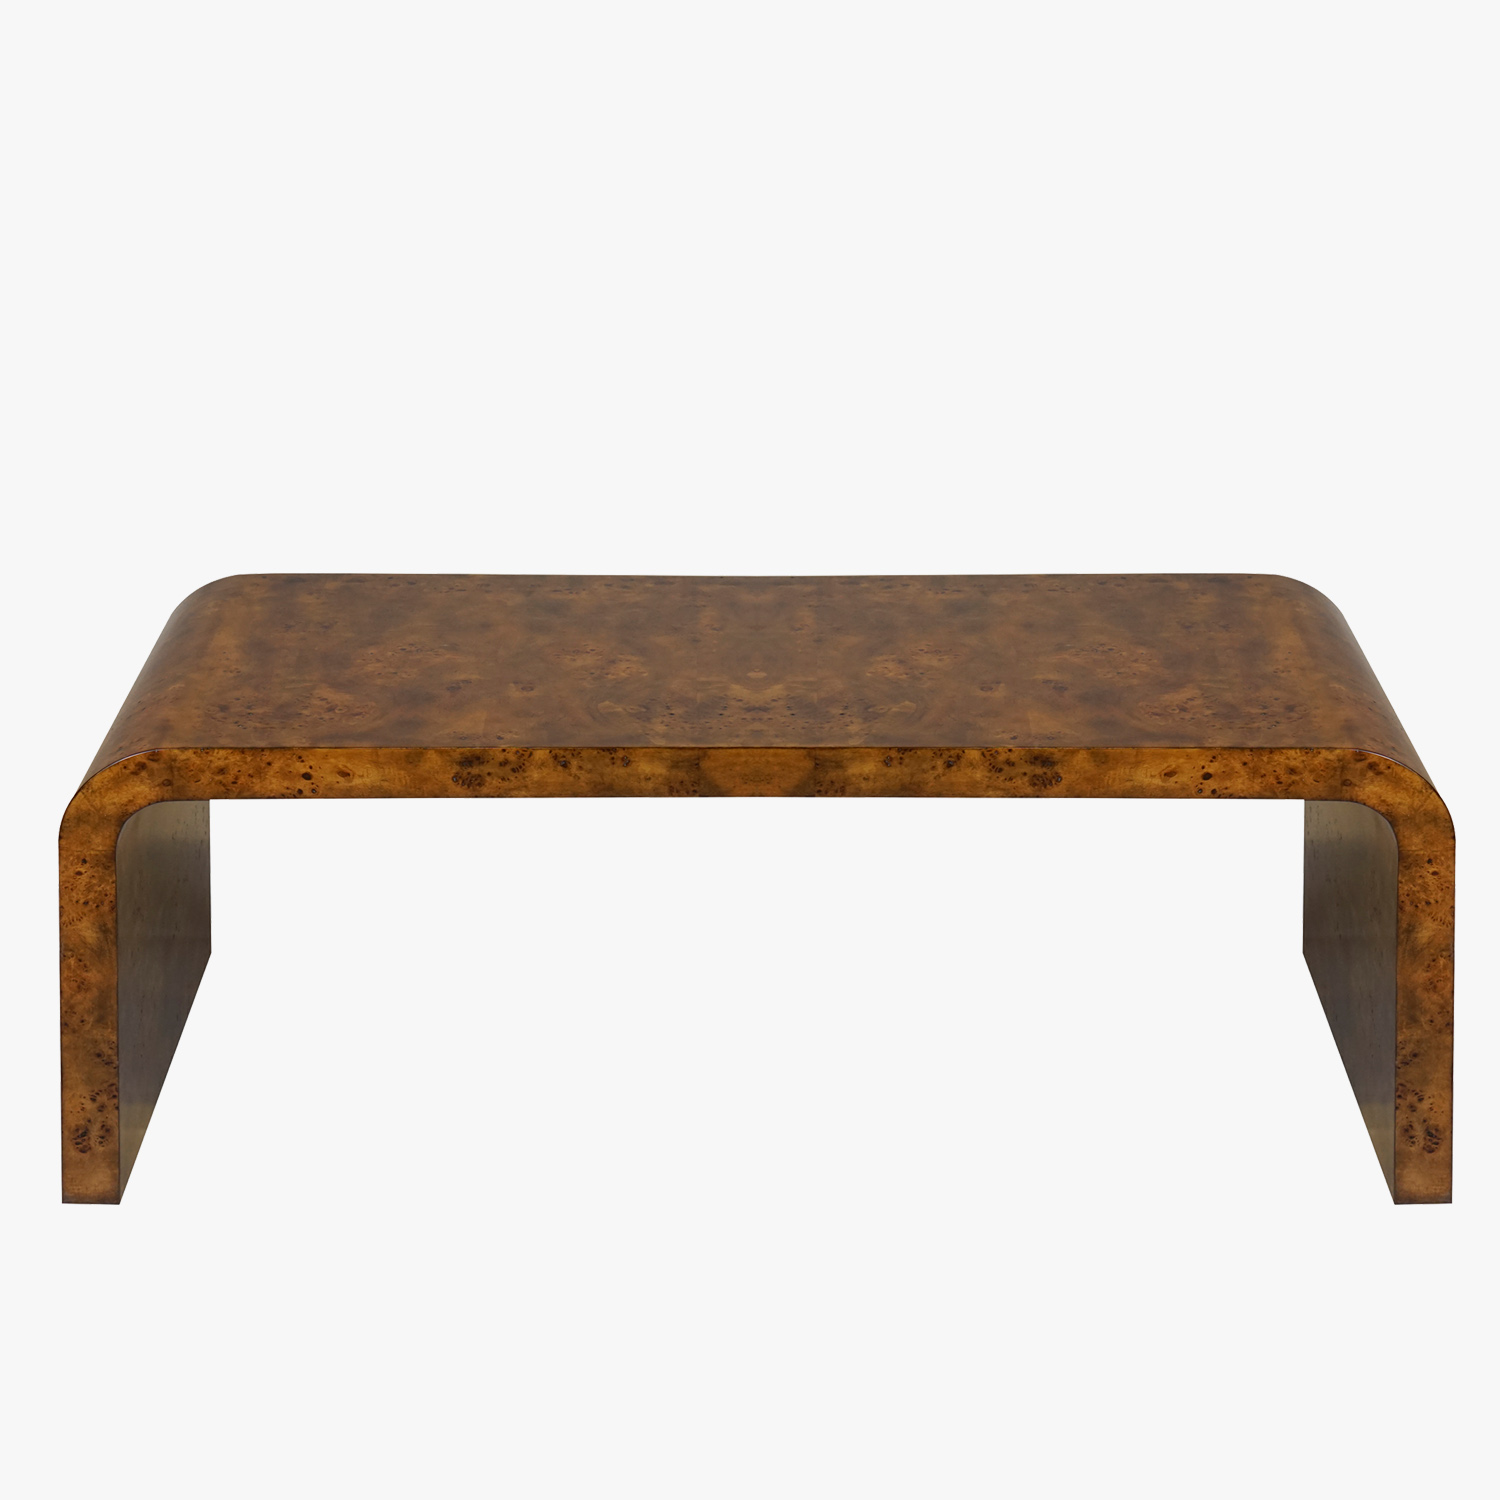 waterfall dark burlwood coffee table coffe tables dear keaton burl wood accent leg hardware laptop marble top pub set target bedside lamps wooden cabinets nautical side small